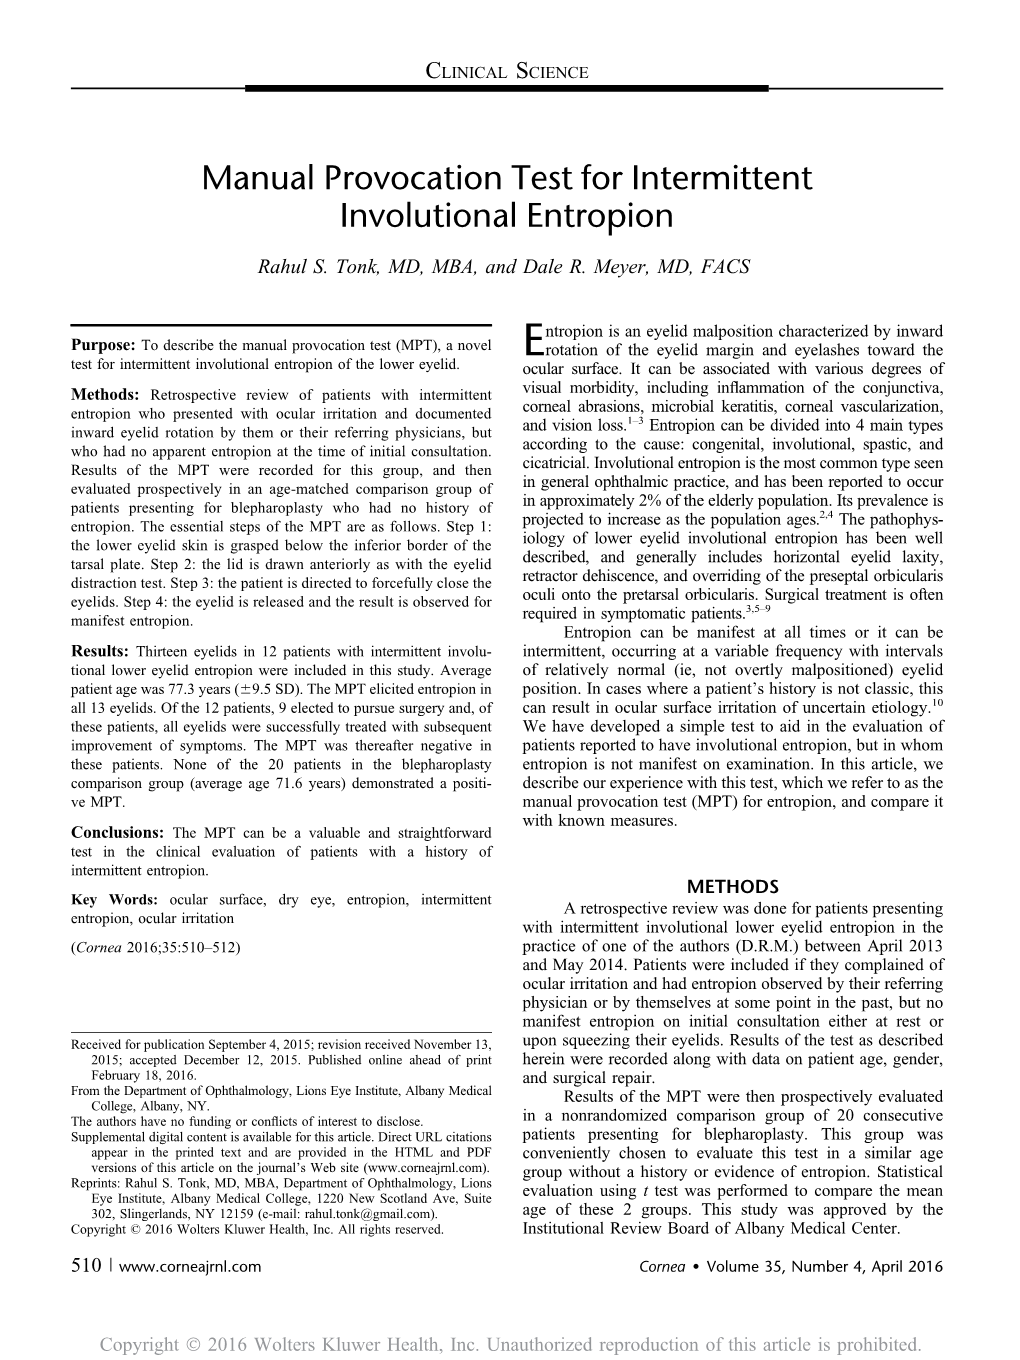 Manual Provocation Test for Intermittent Involutional Entropion